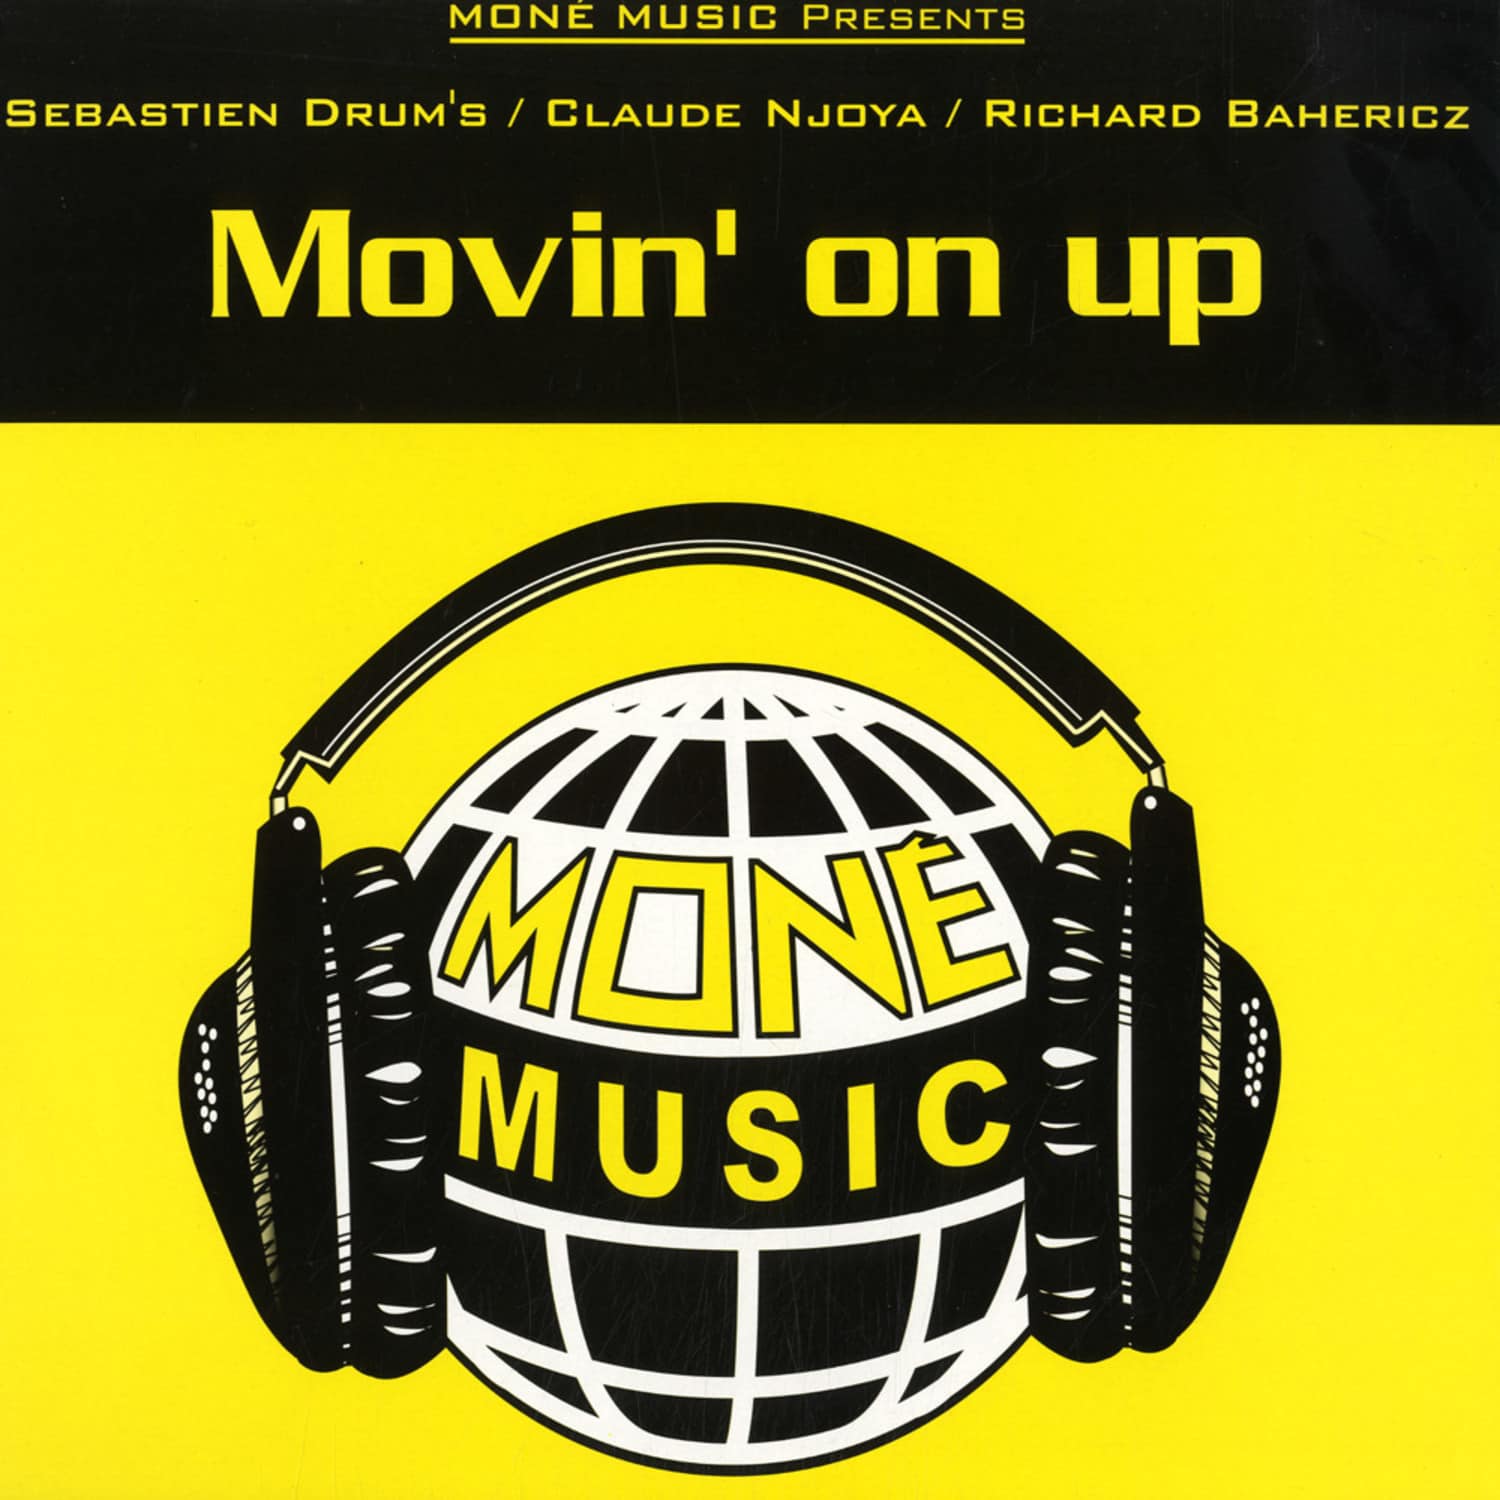 Mone Music Pres. - MOVIN ON UP